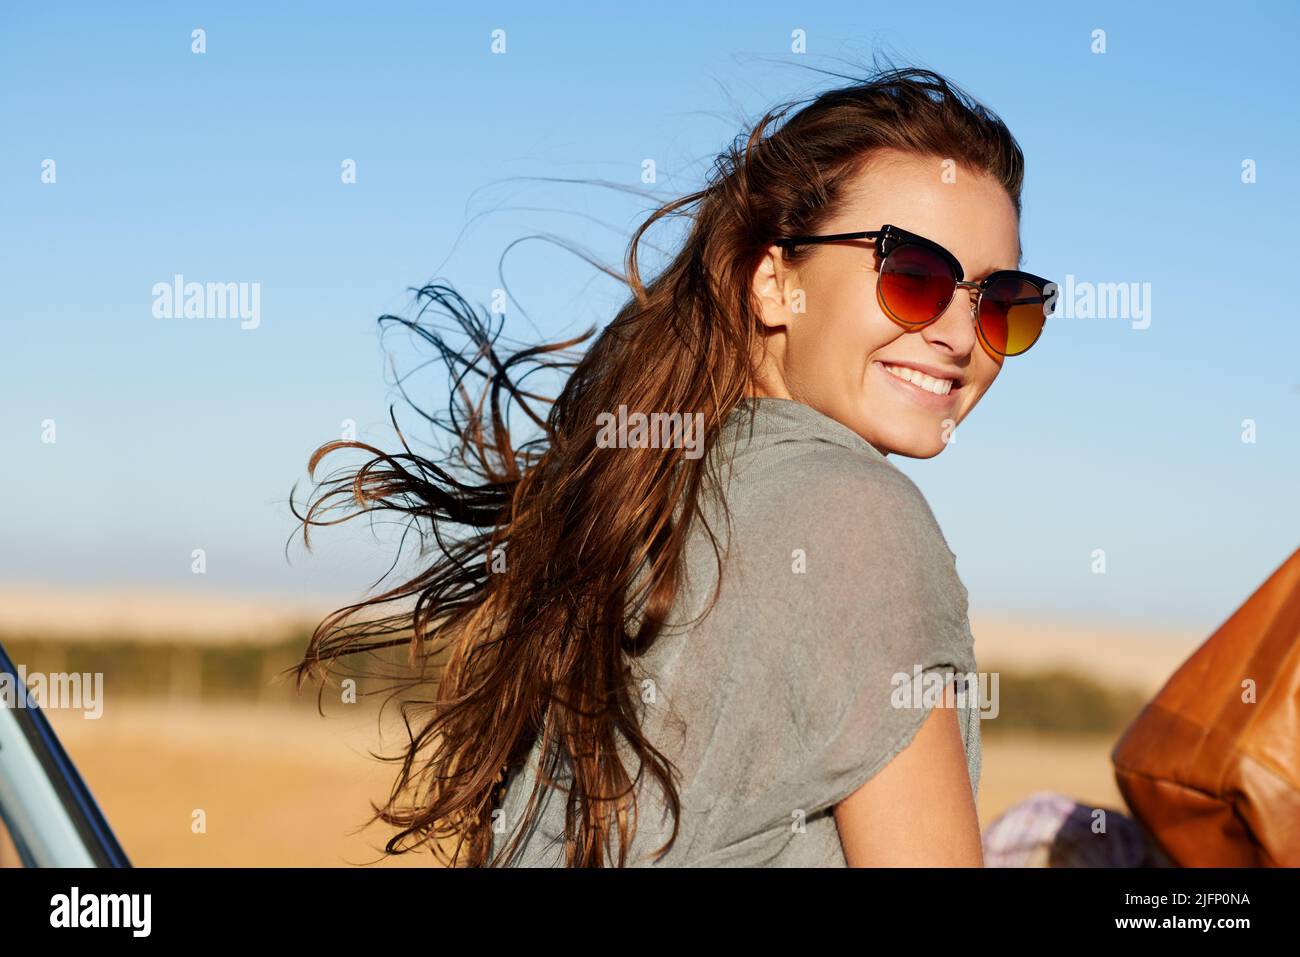 Lifes as real as it gets on the open road. Portrait of attractive young woman smiling wearing horn rimmed sunglasses. Stock Photo